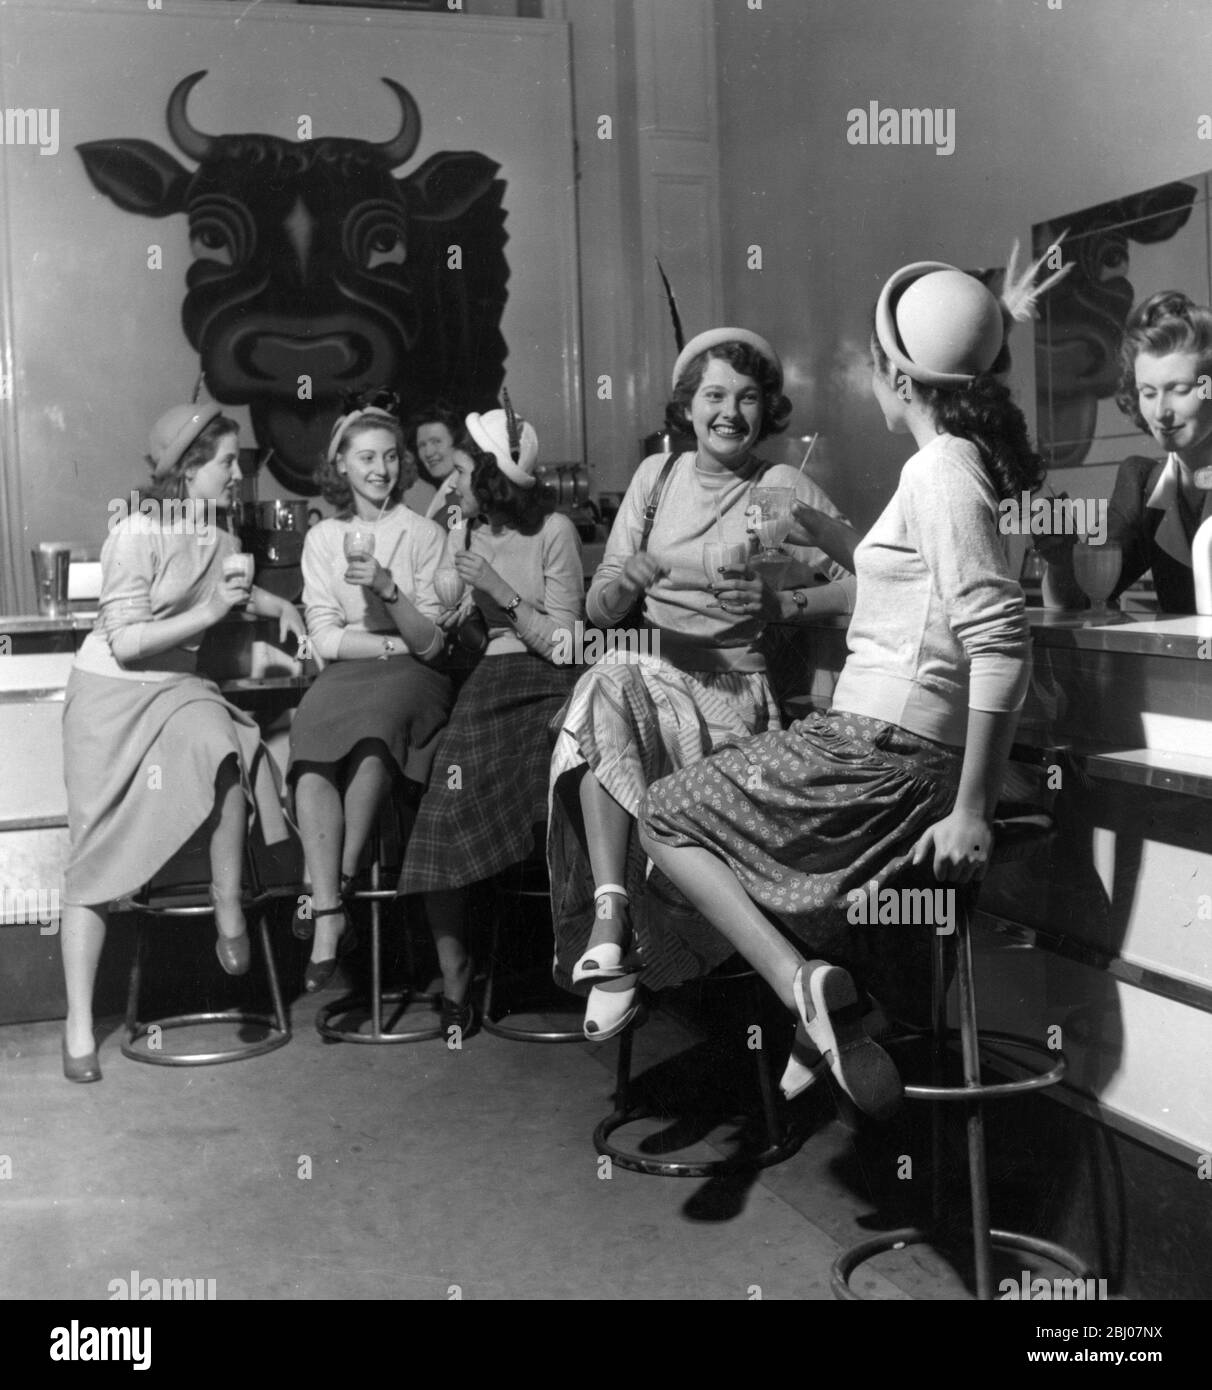 Interior of cafe in 1949 showing women chatting Stock Photo